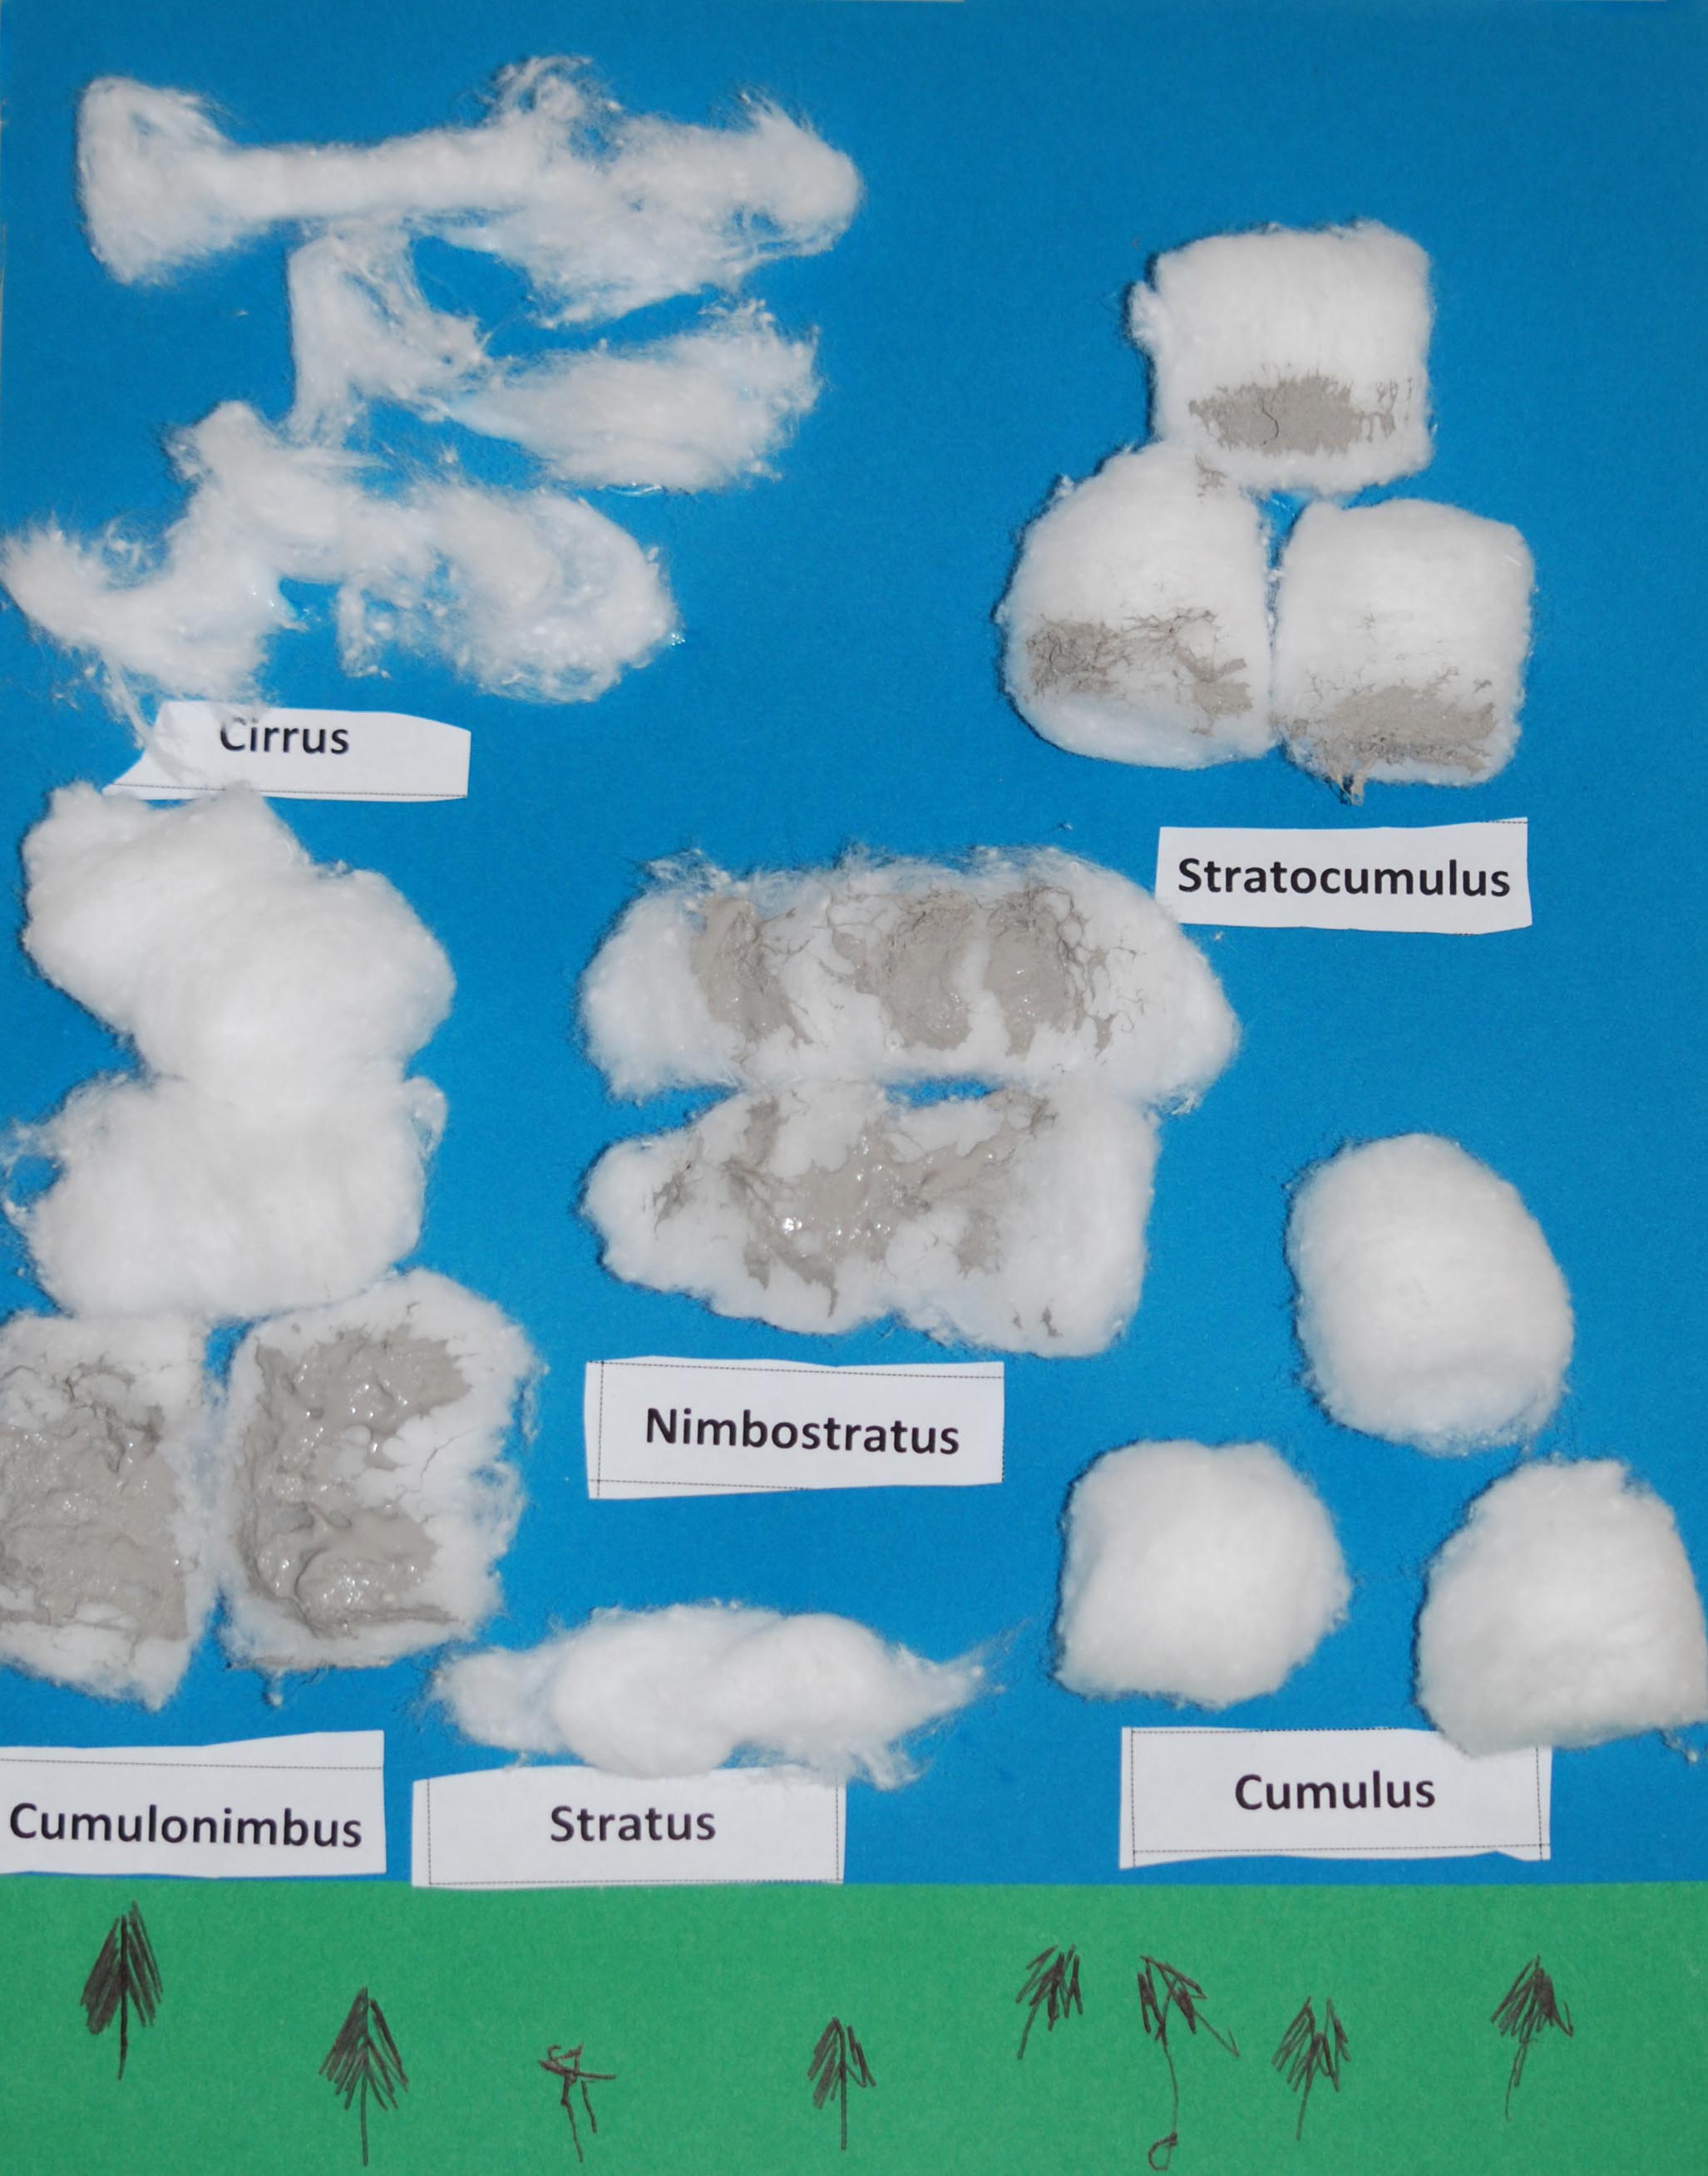 Nature Study on Clouds. Clouds|Nature Study|Charlotte Mason|Art Project|Homeschool|Homeschool Lessons|